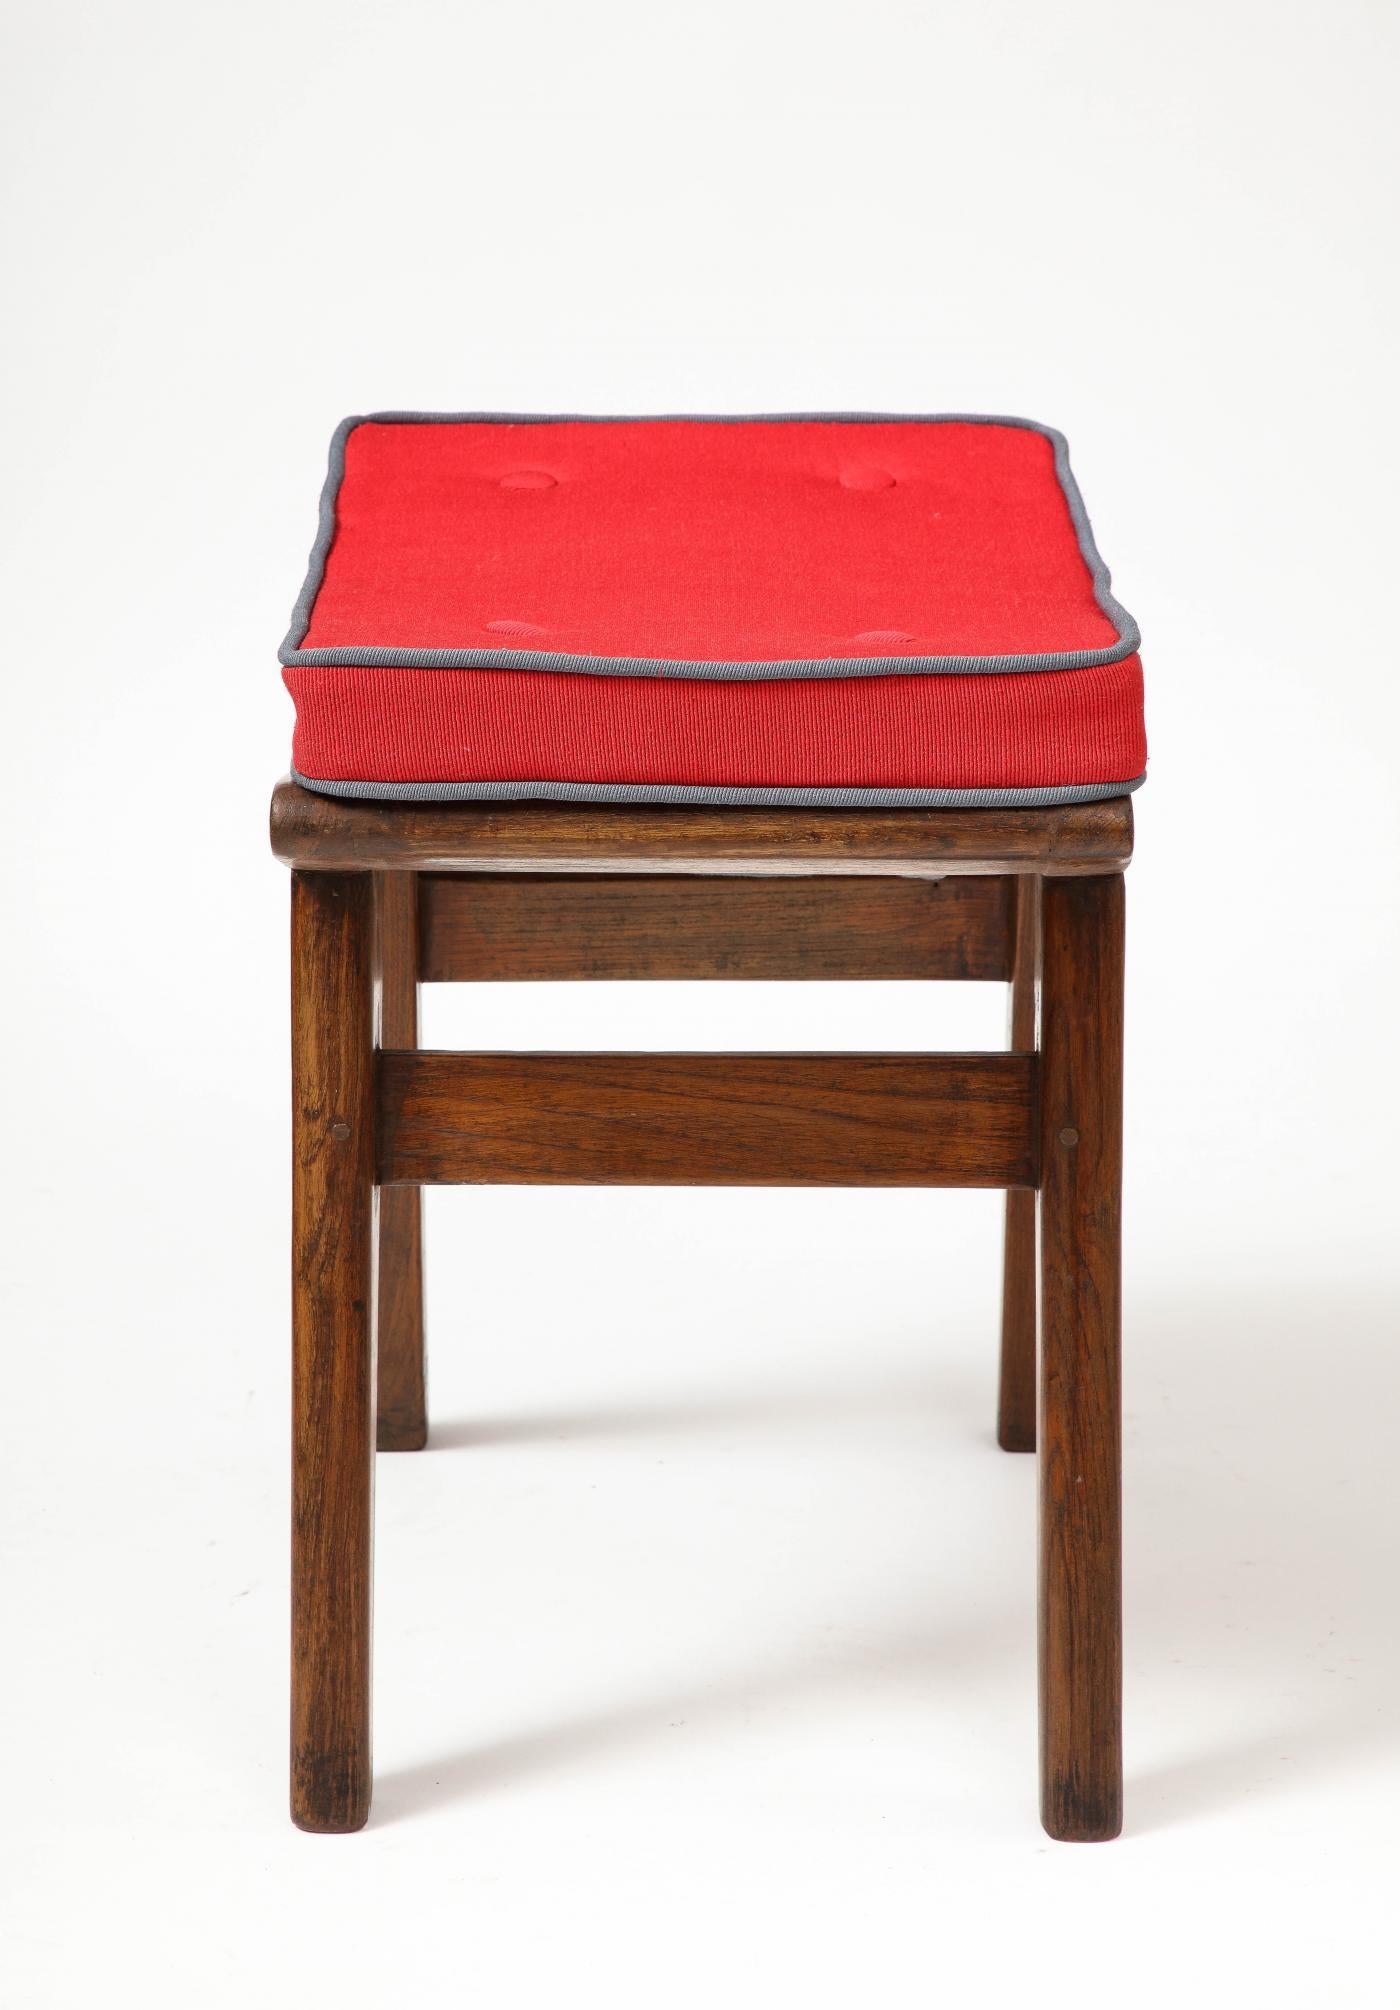 20th Century Stool in Teak, Cane and Upholstery by Pierre Jeanneret, Chandigarh, c. 1959 For Sale